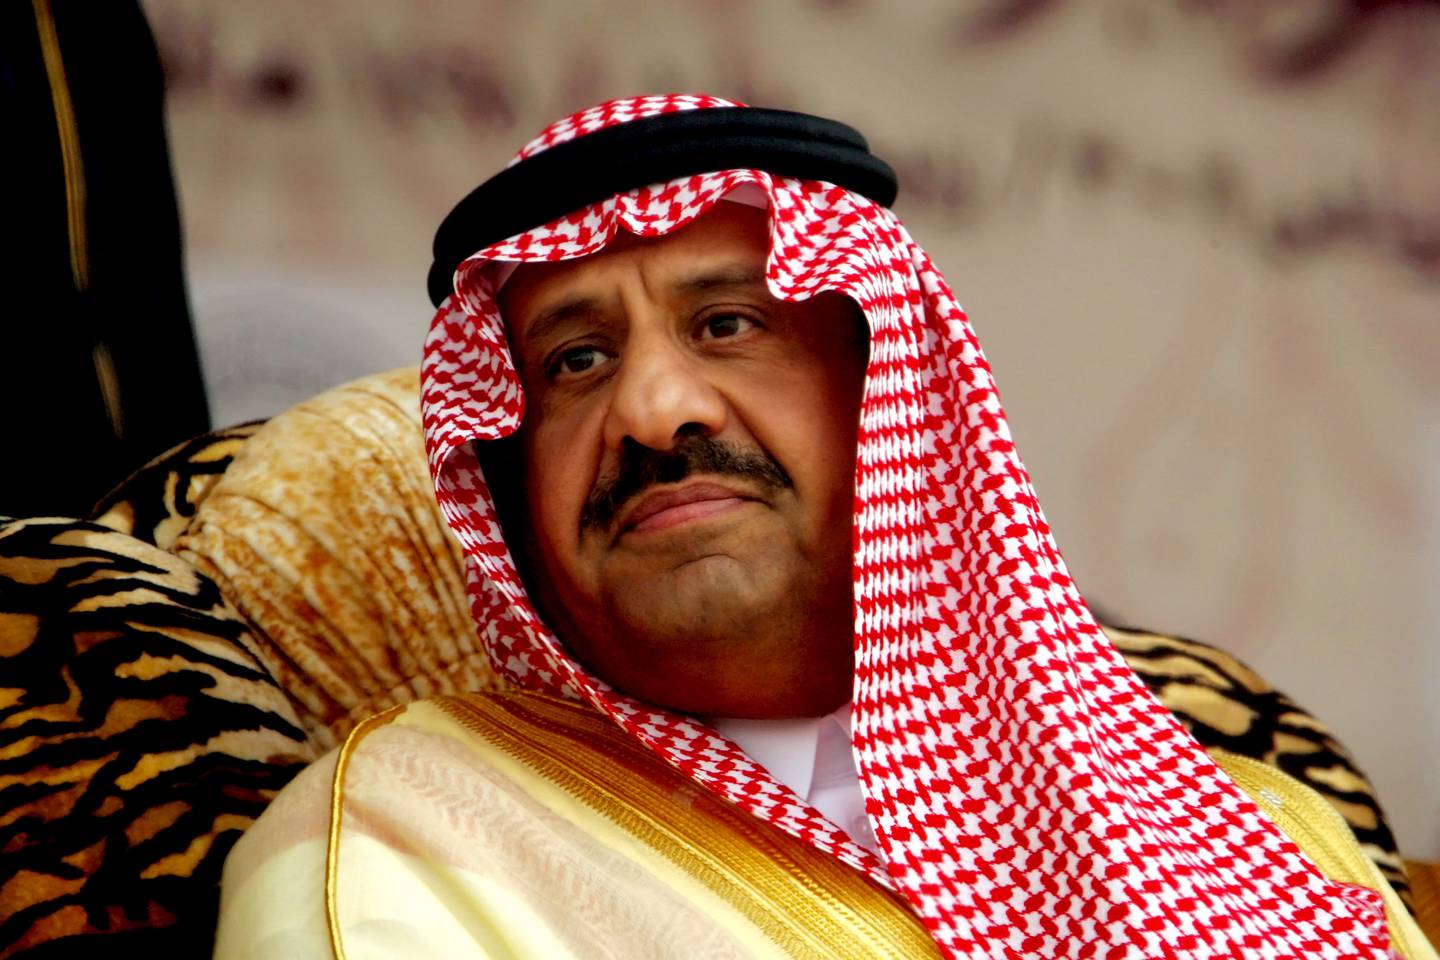 As chief executive of Makshaff, Mr Kanaan was responsible for the personal affairs, staff, luxury homes, private yacht and jet of Saudi Arabia’s Prince Khalid bin Sultan bin Abdulaziz Al Saud. 'It was non-stop,' he says. AFP / Hassan Ammar